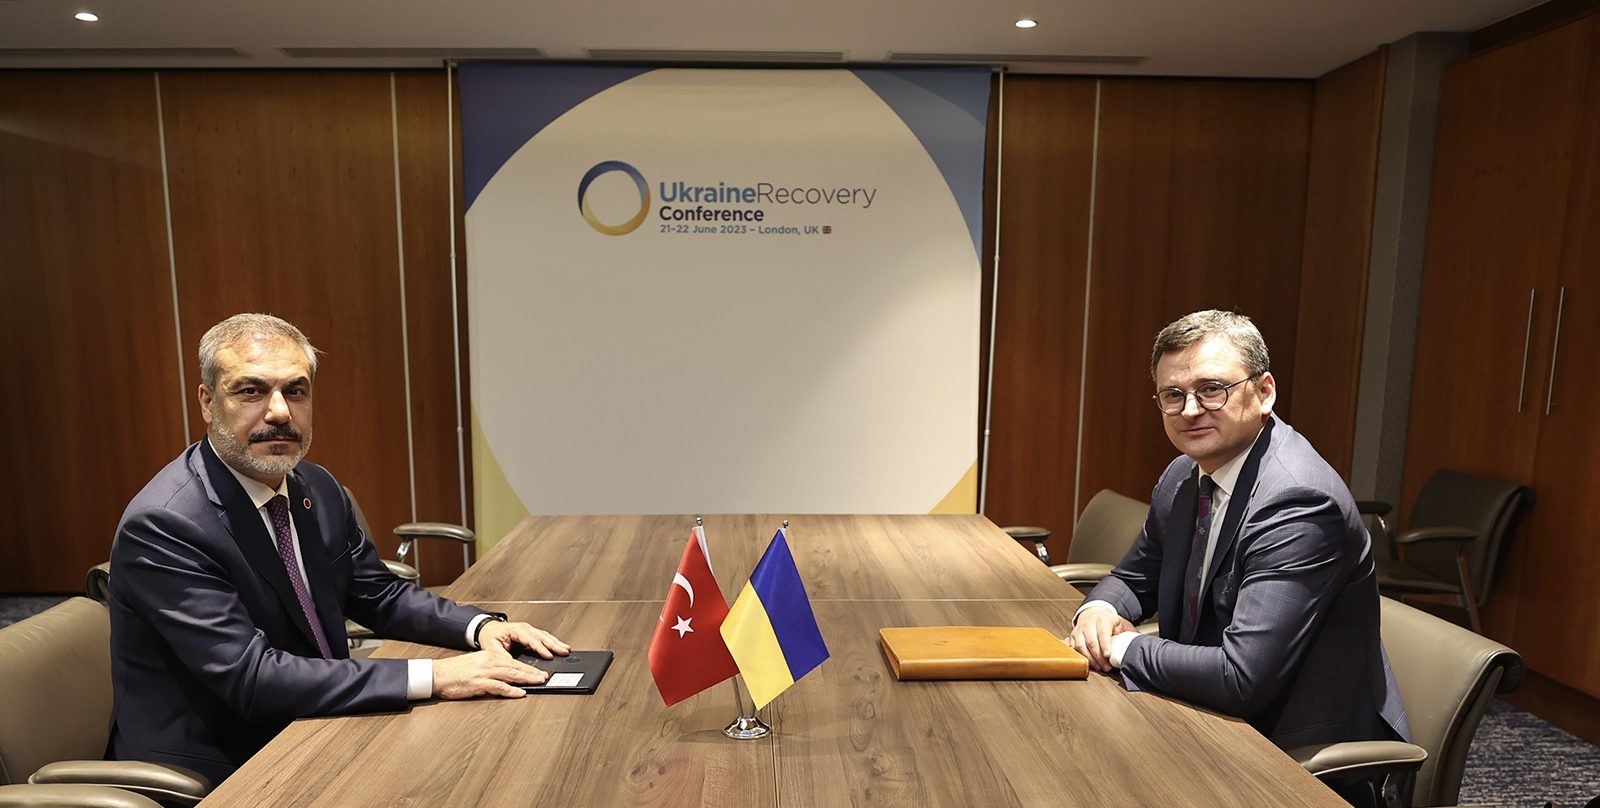 Türkiye is “as resolute as ever” in support of Ukraine’s sovereignty